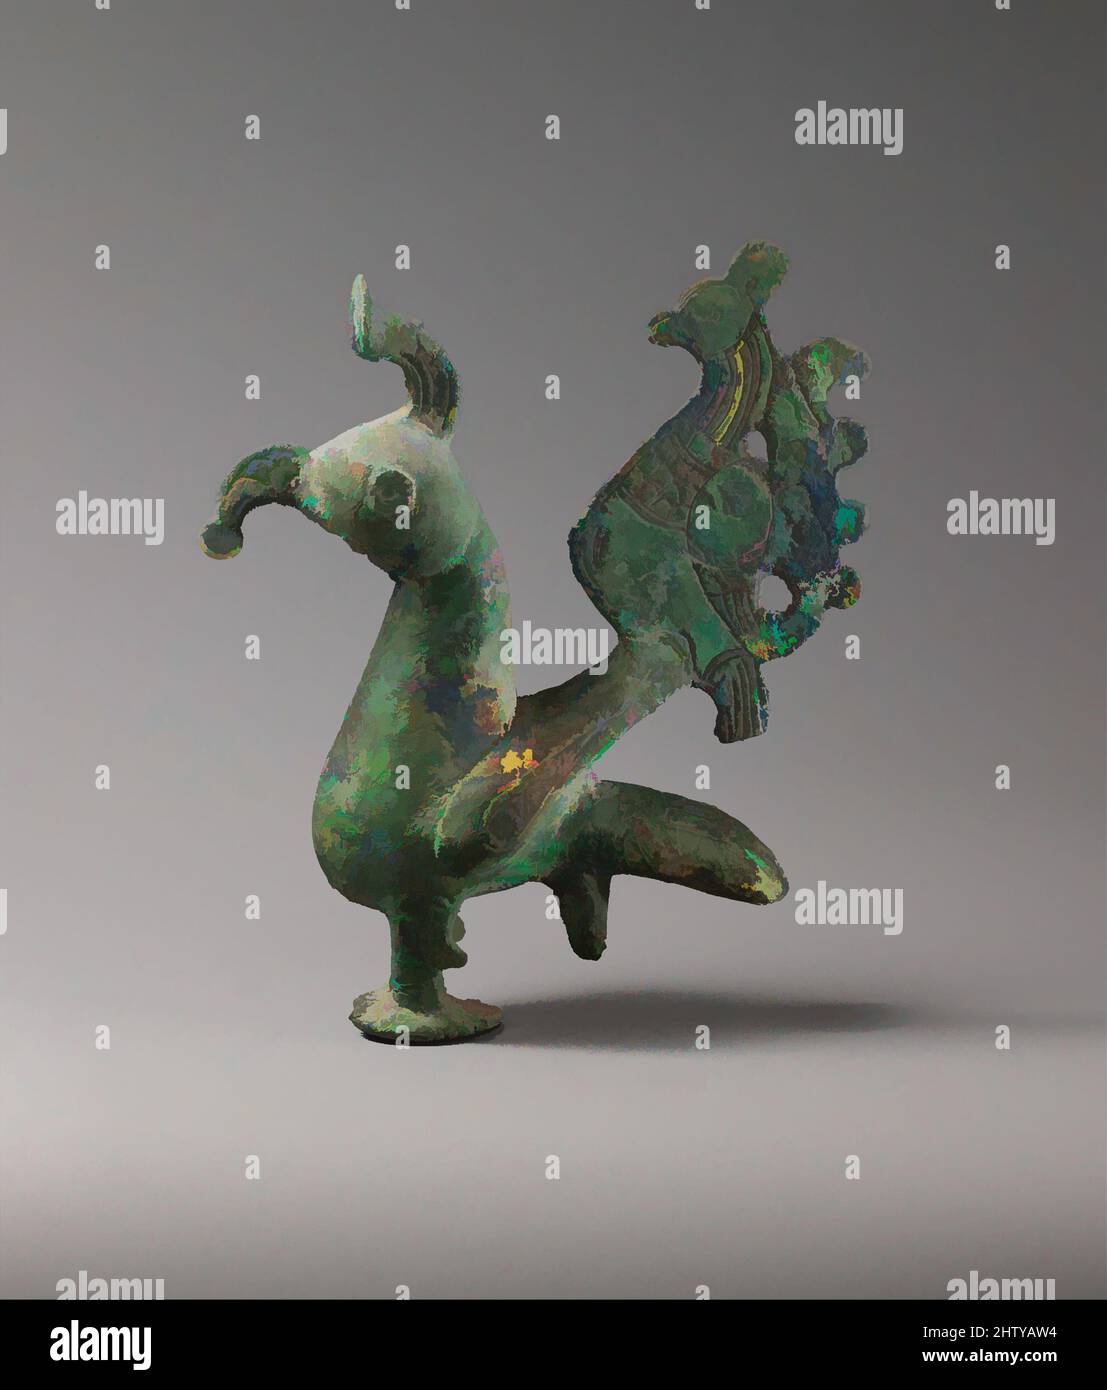 Art inspired by Finial, 11th–12th century, Attributed to Iran, Bronze; cast and chased, H. 7 in. (17.8 cm), Metal, Classic works modernized by Artotop with a splash of modernity. Shapes, color and value, eye-catching visual impact on art. Emotions through freedom of artworks in a contemporary way. A timeless message pursuing a wildly creative new direction. Artists turning to the digital medium and creating the Artotop NFT Stock Photo